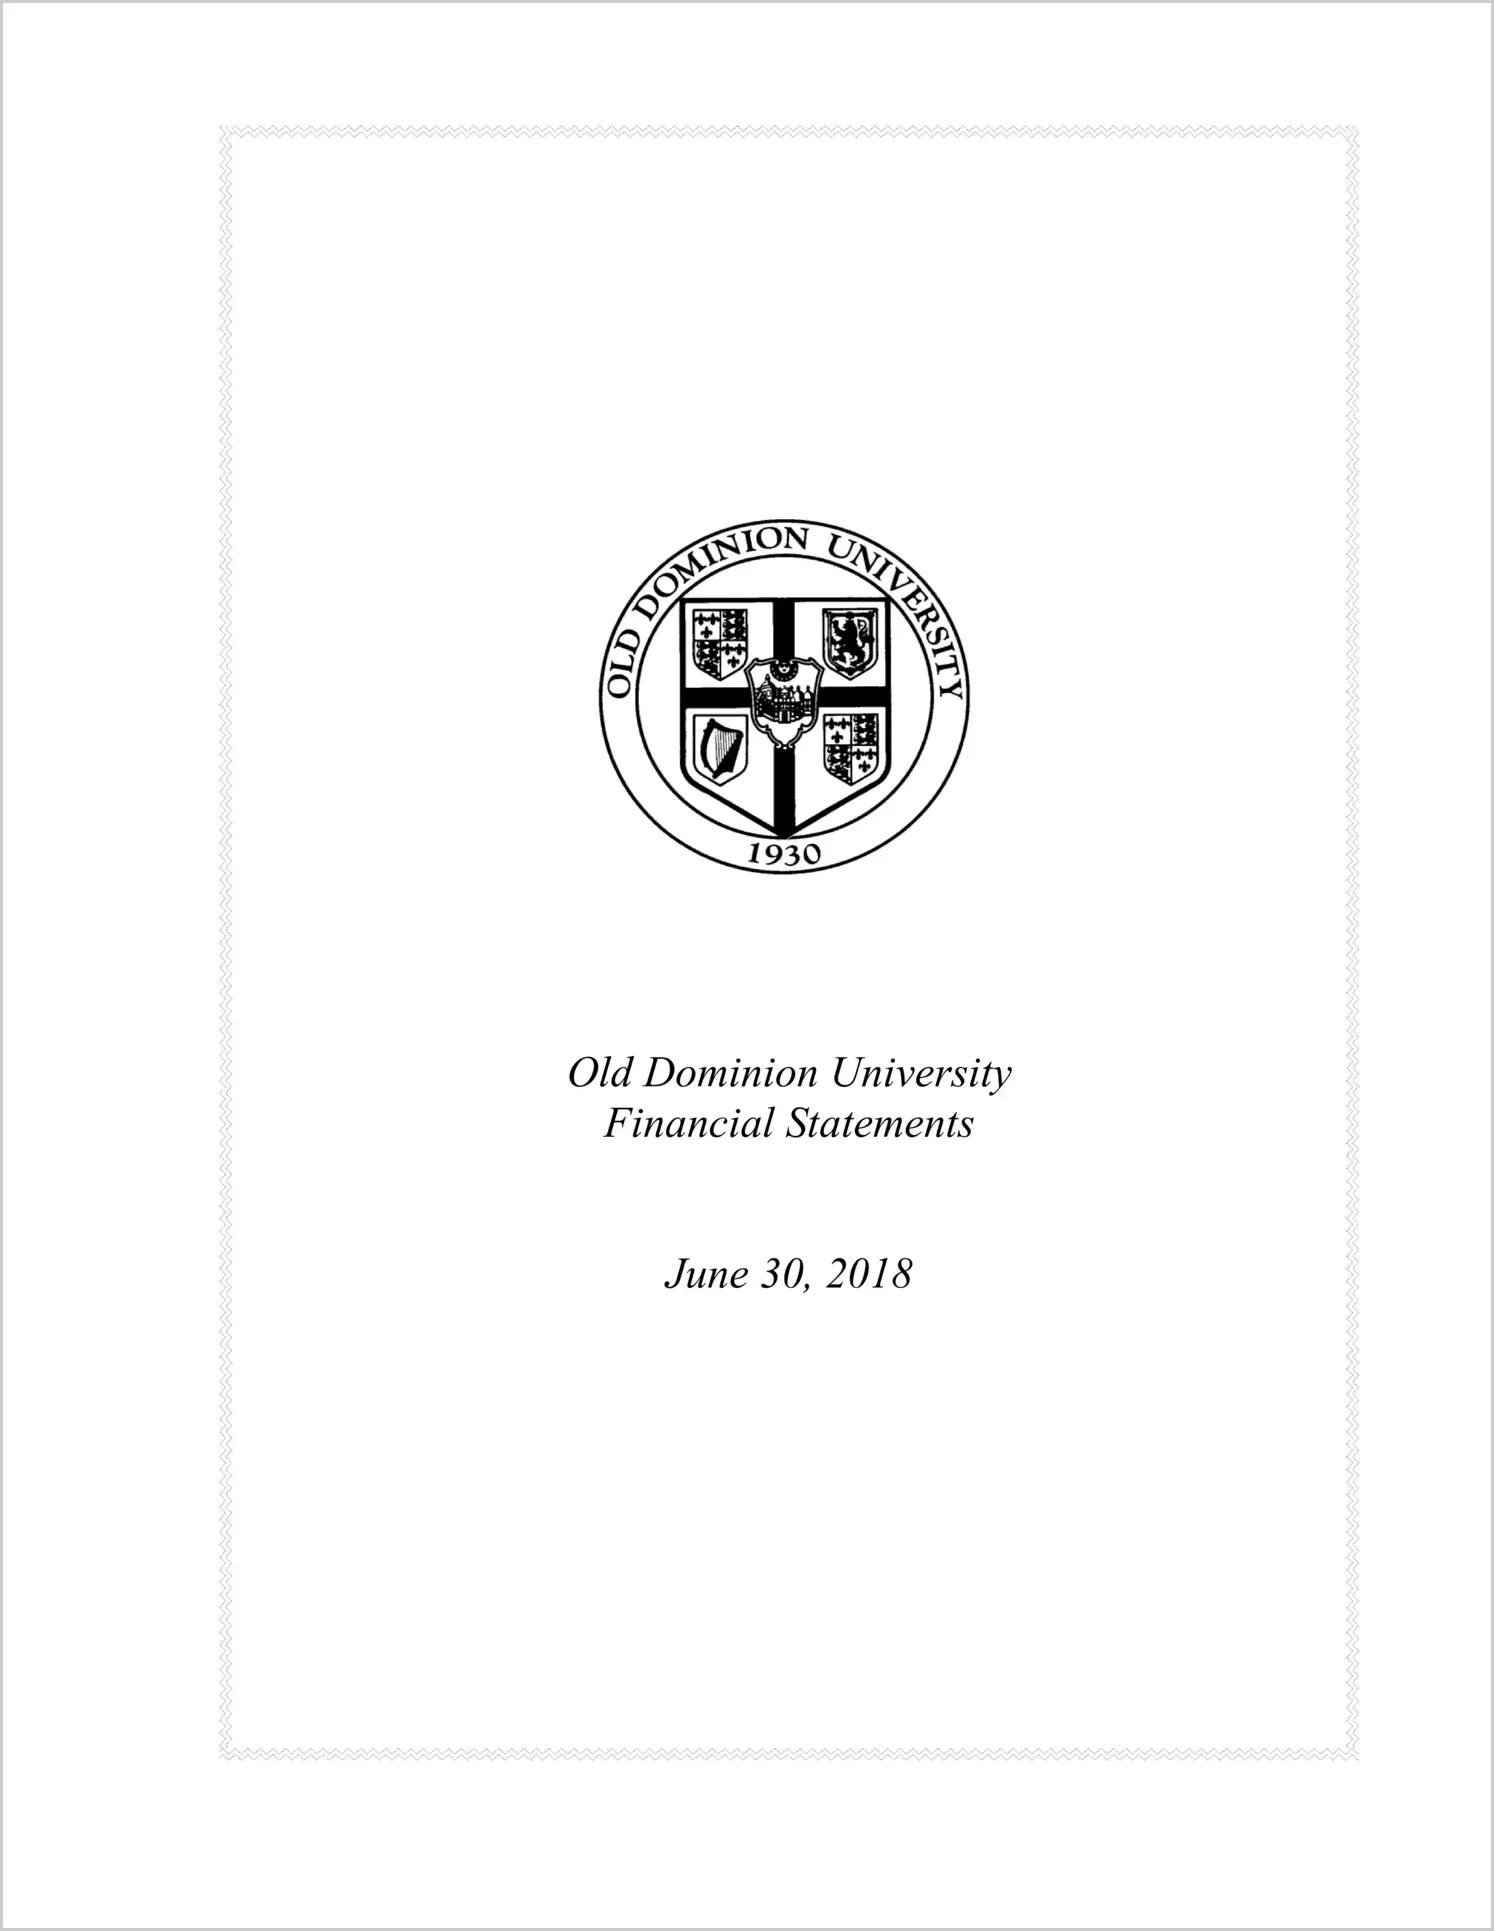 Old Dominion University Financial Statements for the year ended June 30, 2018